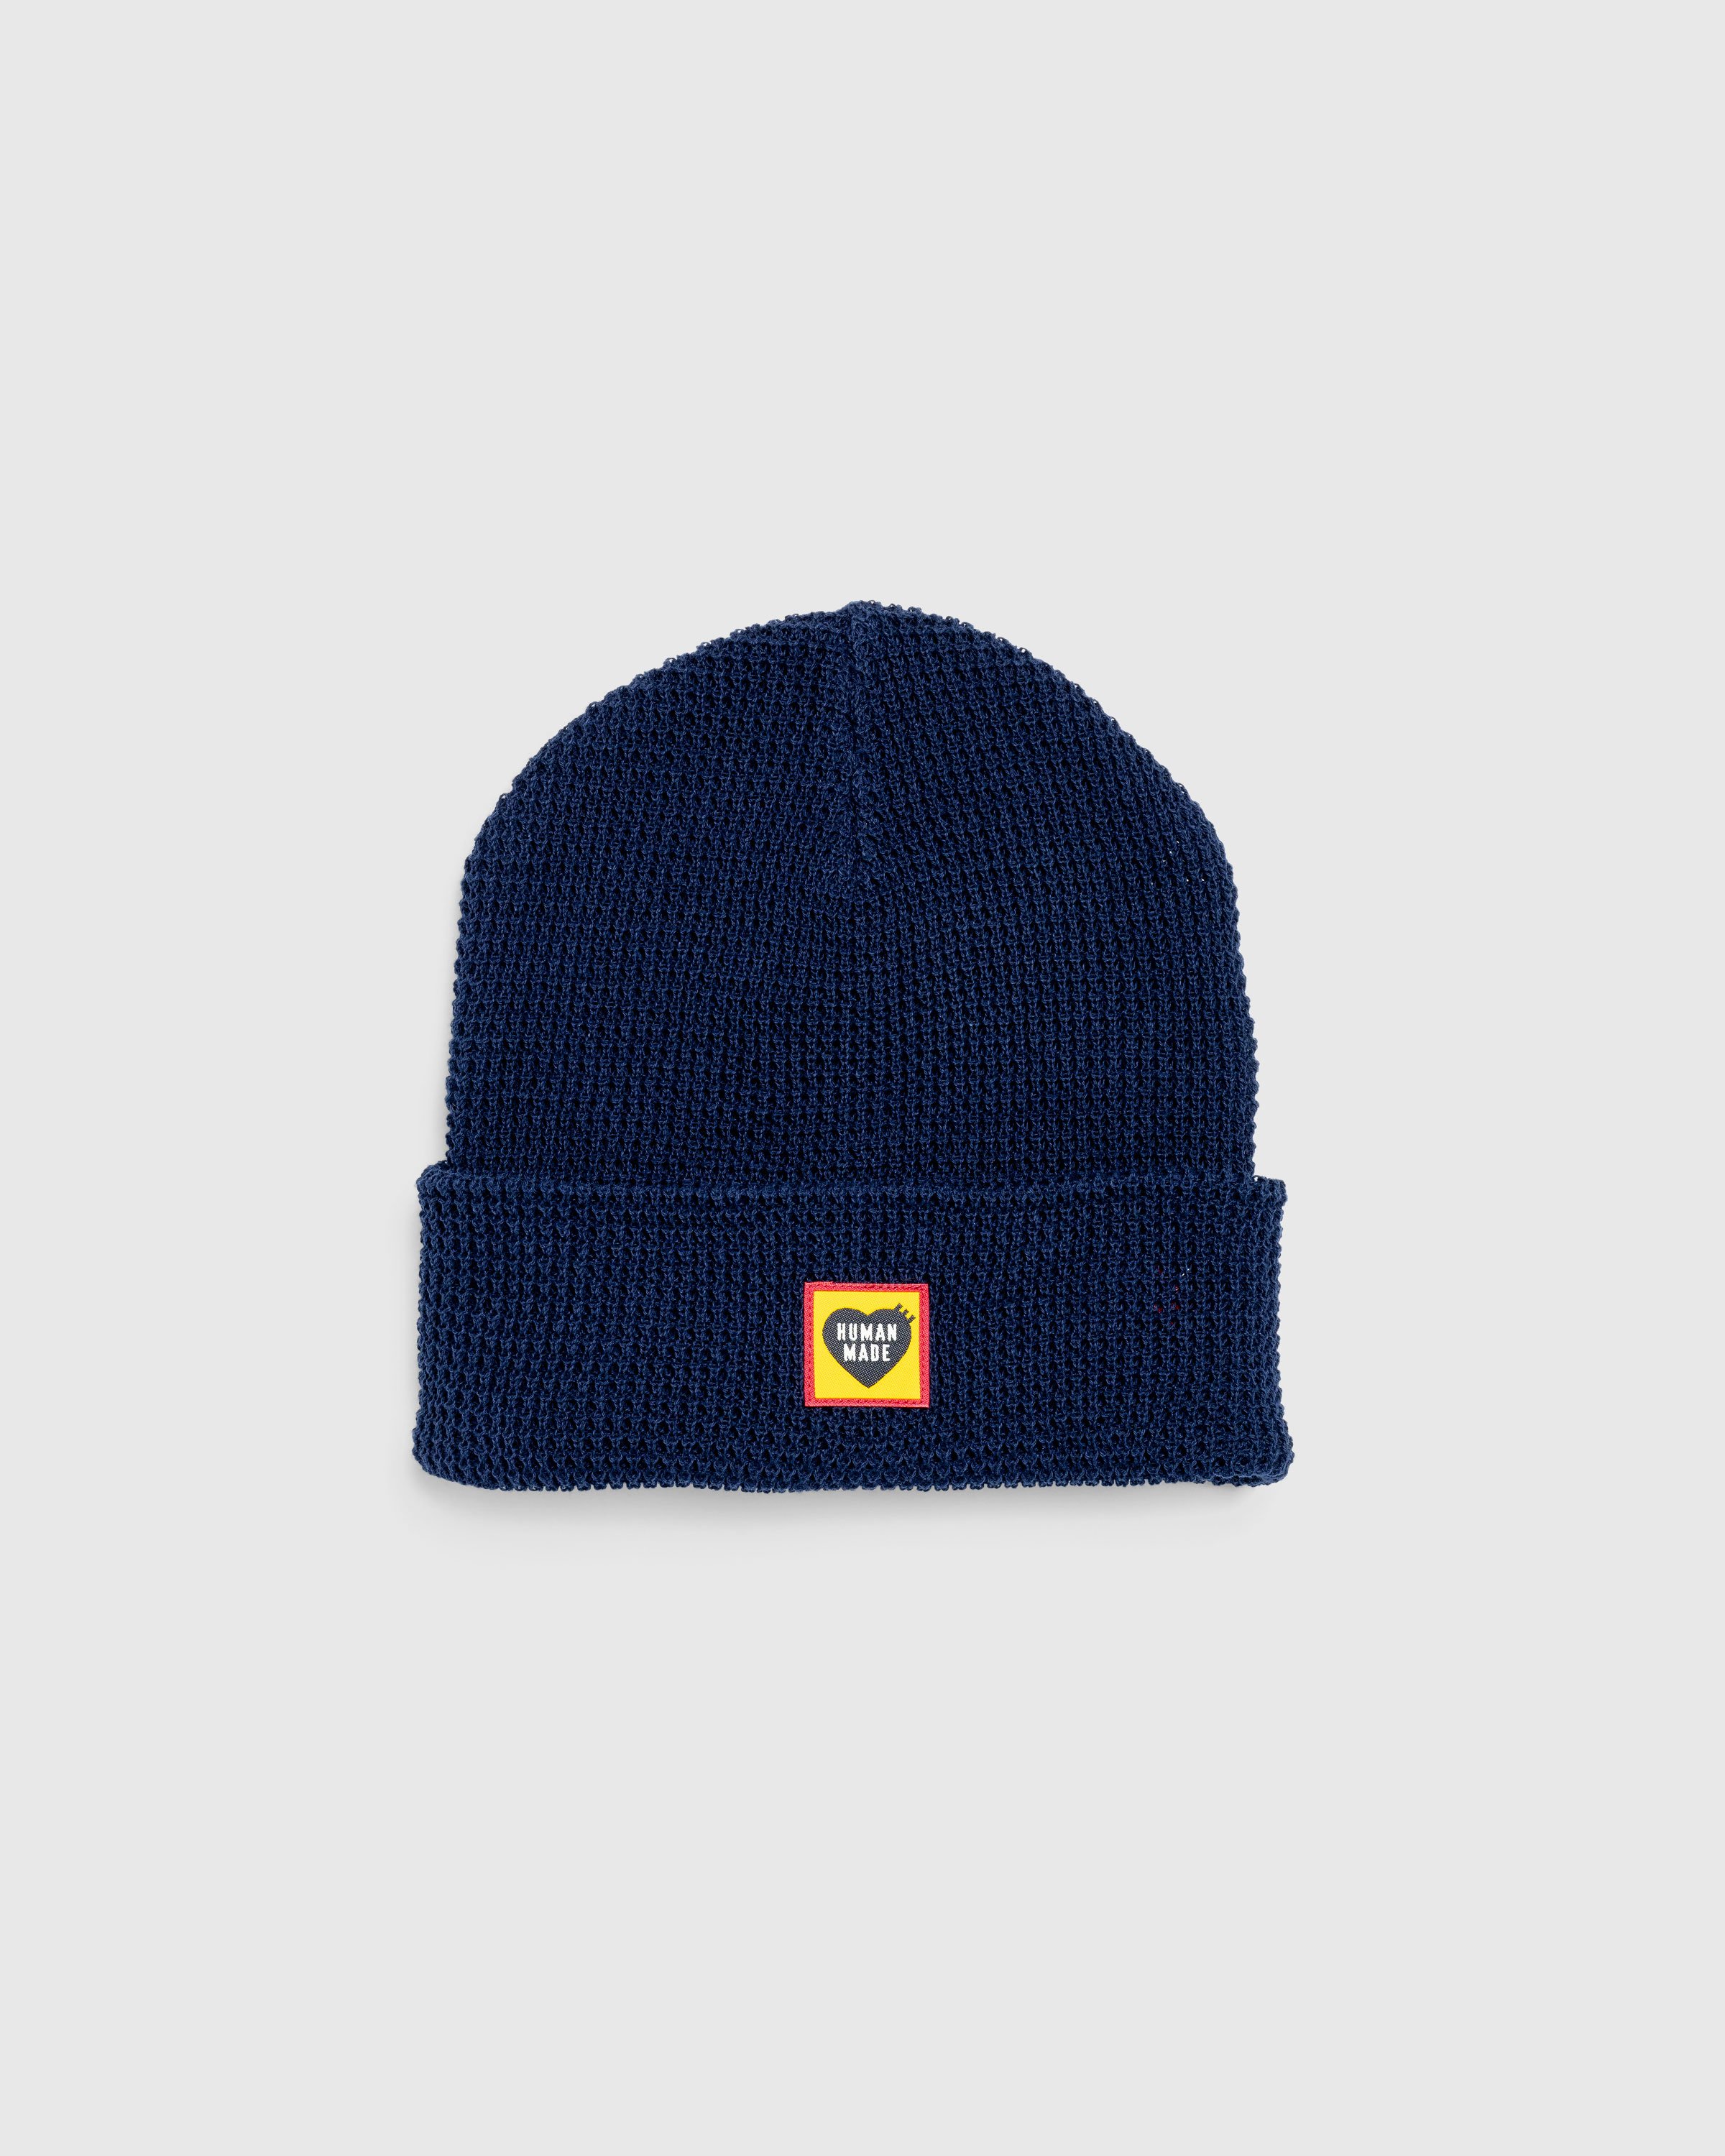 Human Made - WAFFLE BEANIE NAVY - Accessories - Blue - Image 1